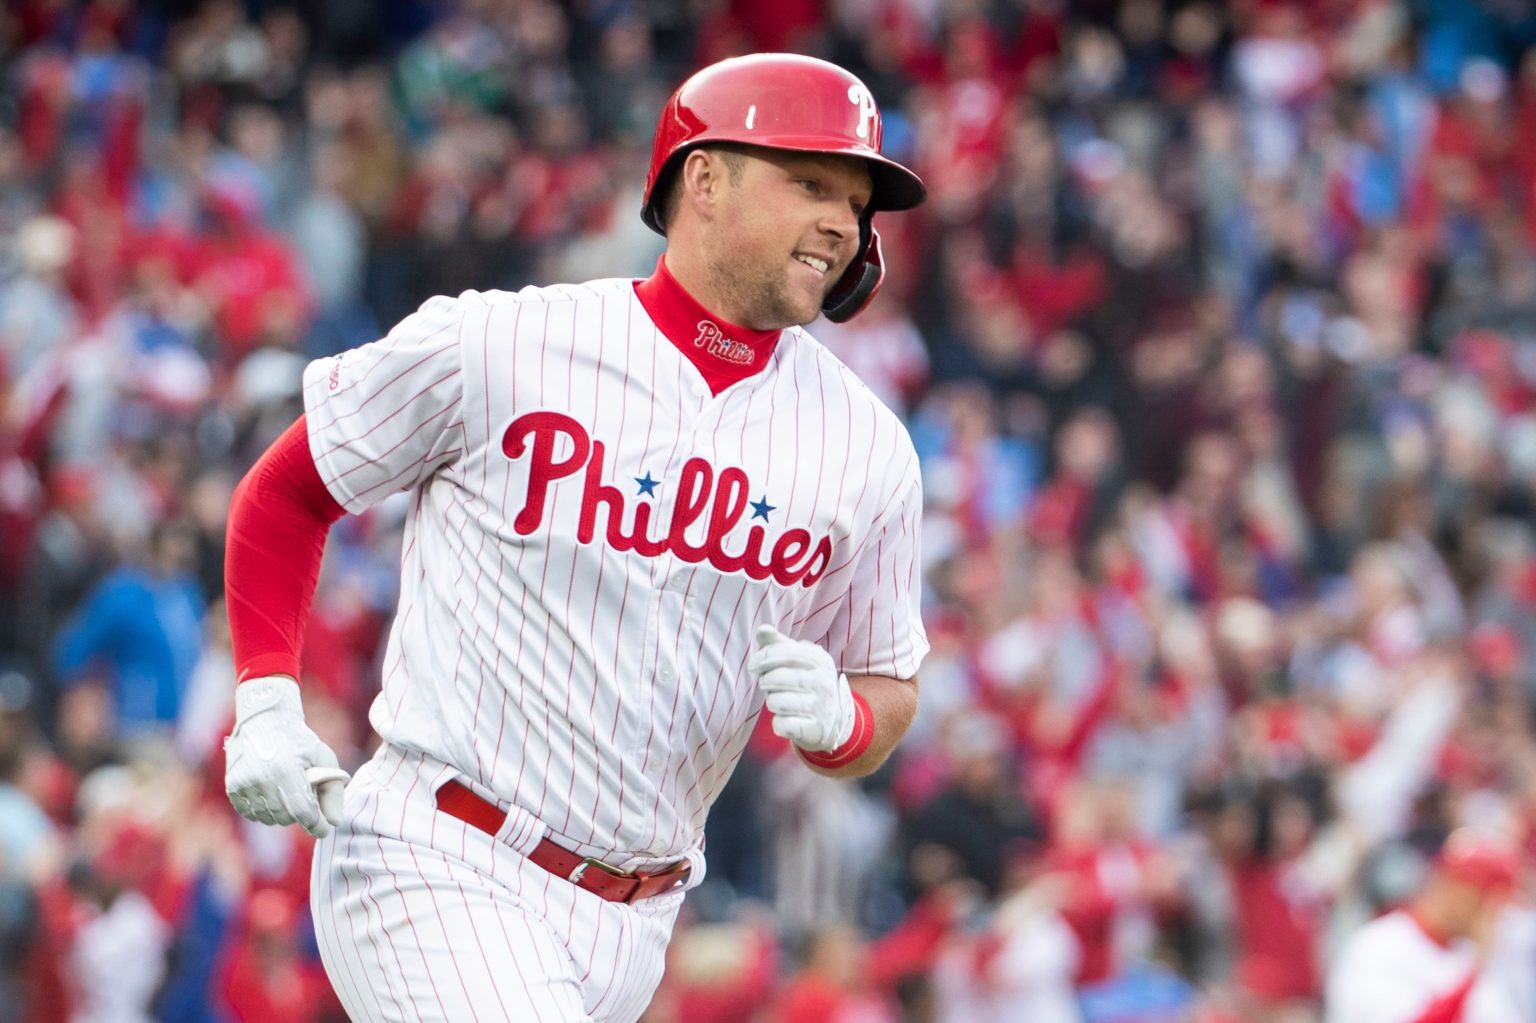 Phillies 1B Rhys Hoskins to Miss 46 Months After Elbow Surgery